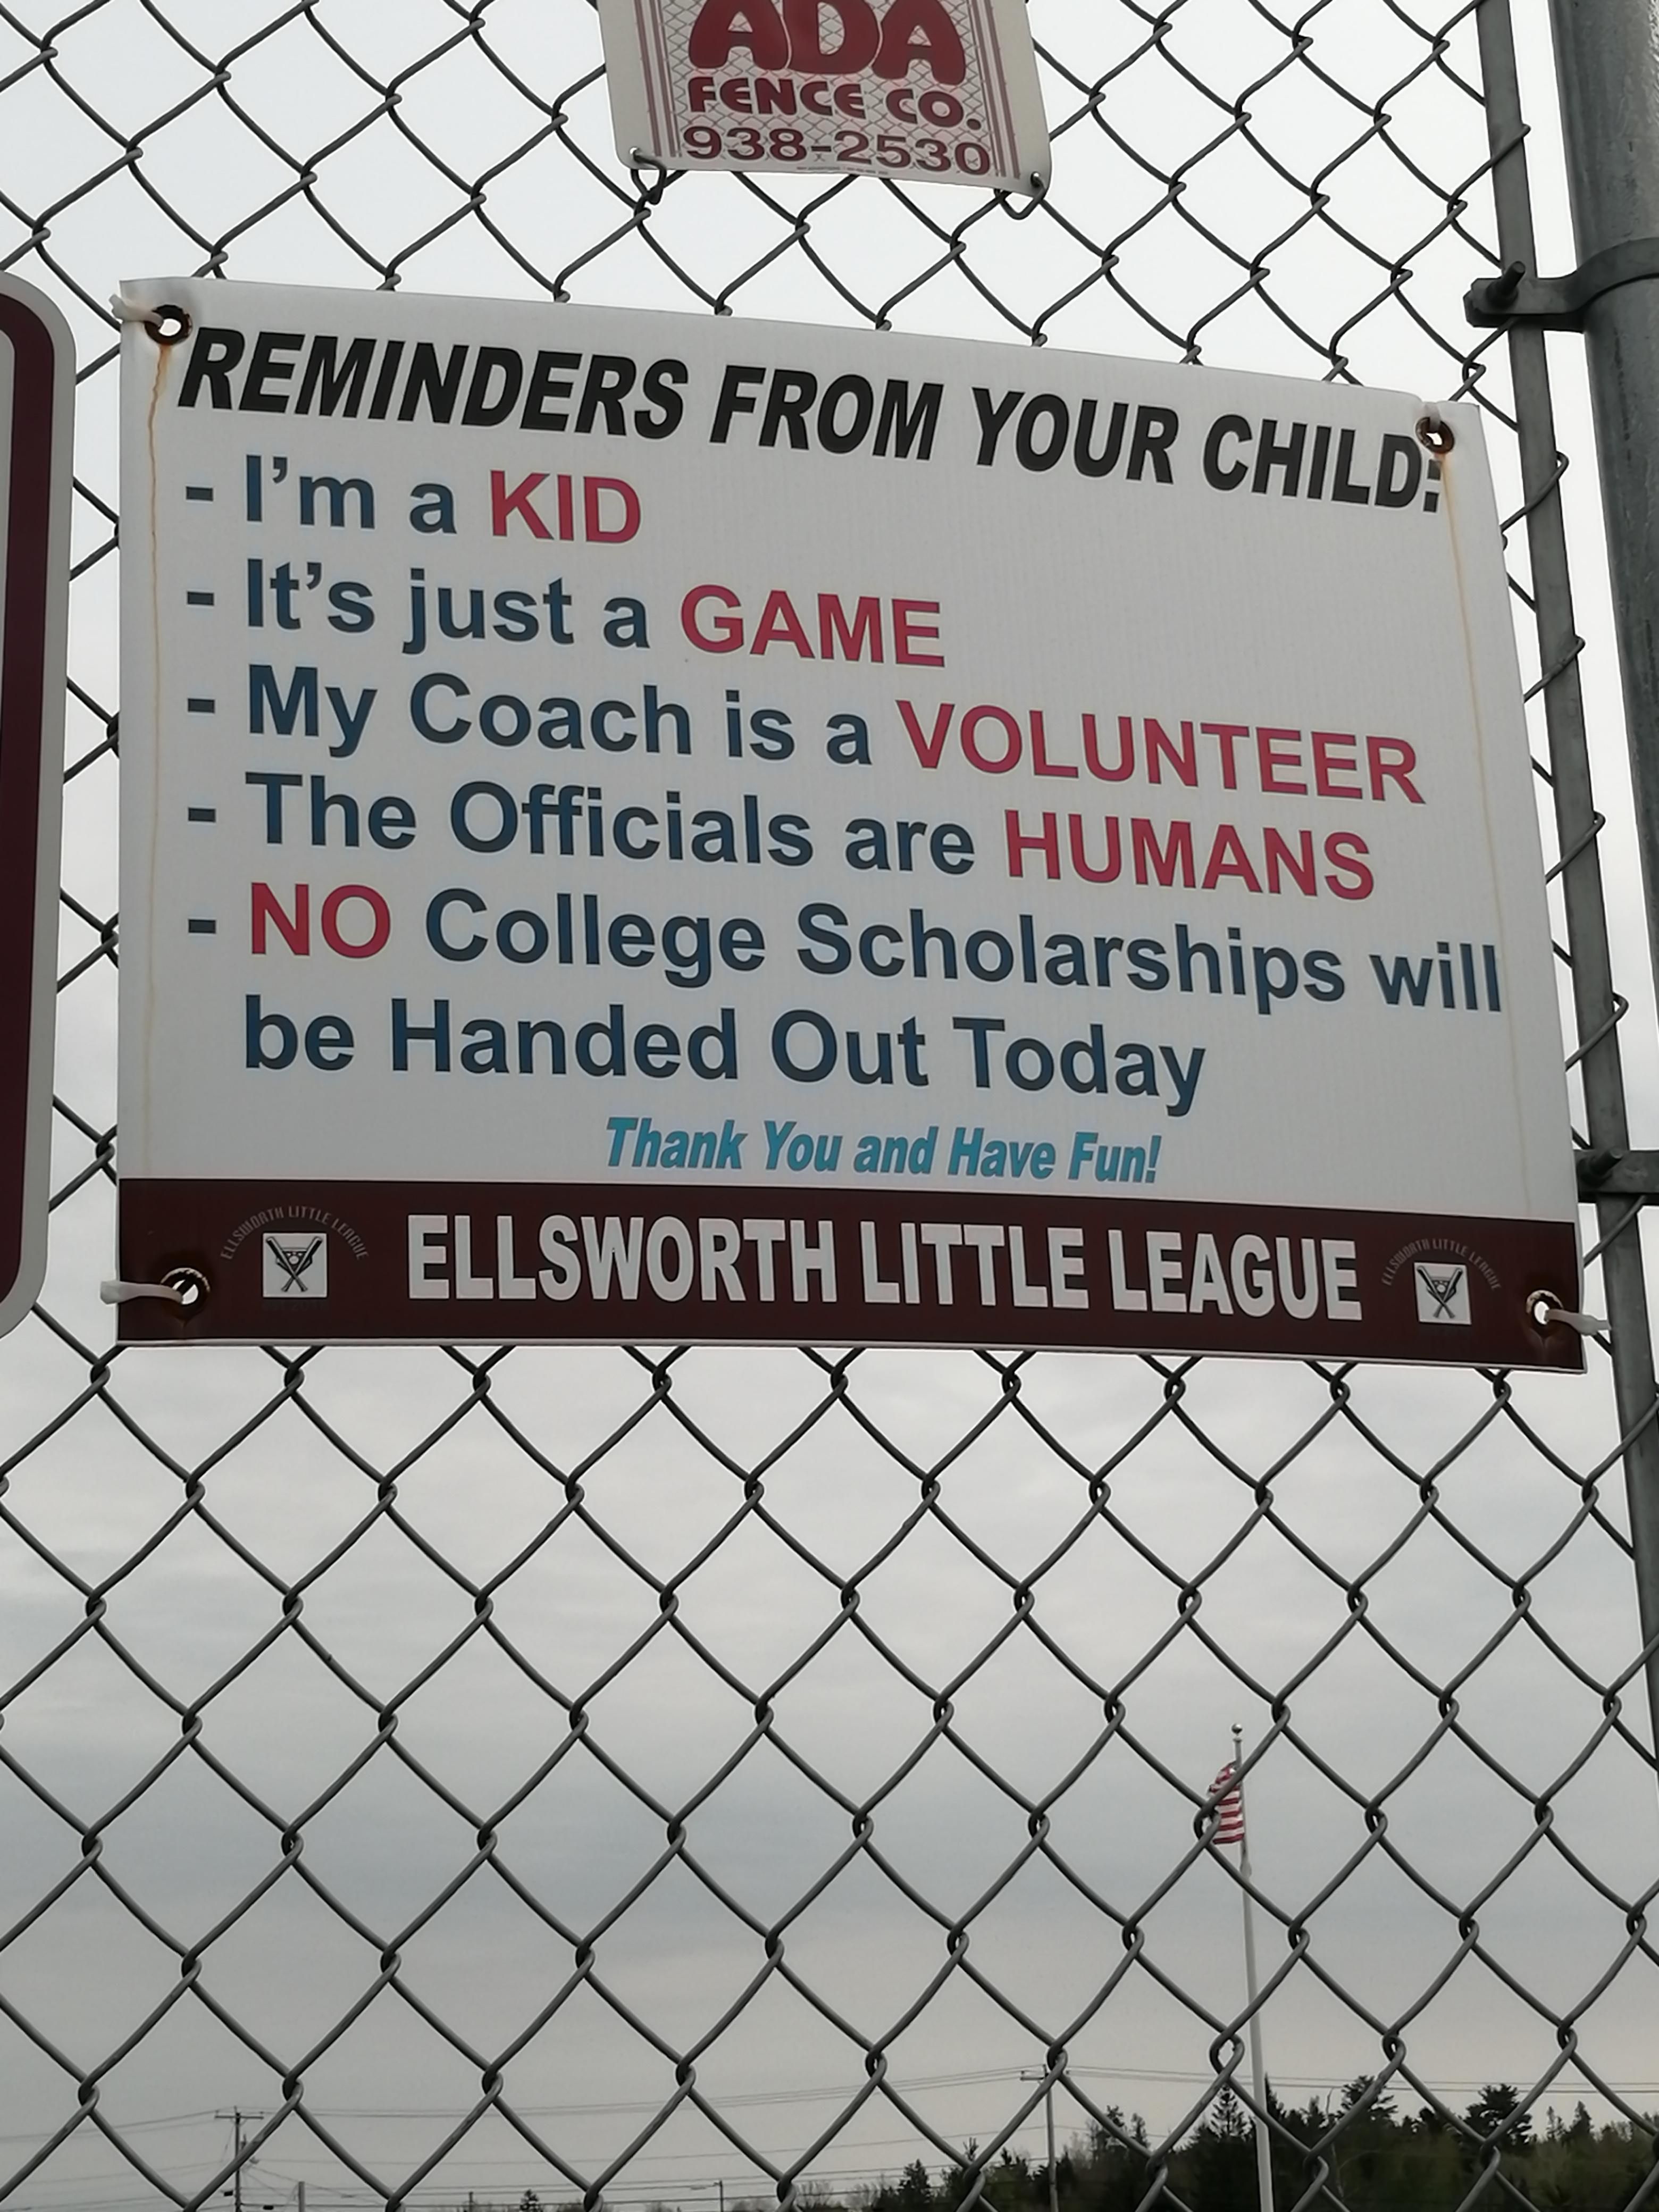 A message from the local little league team